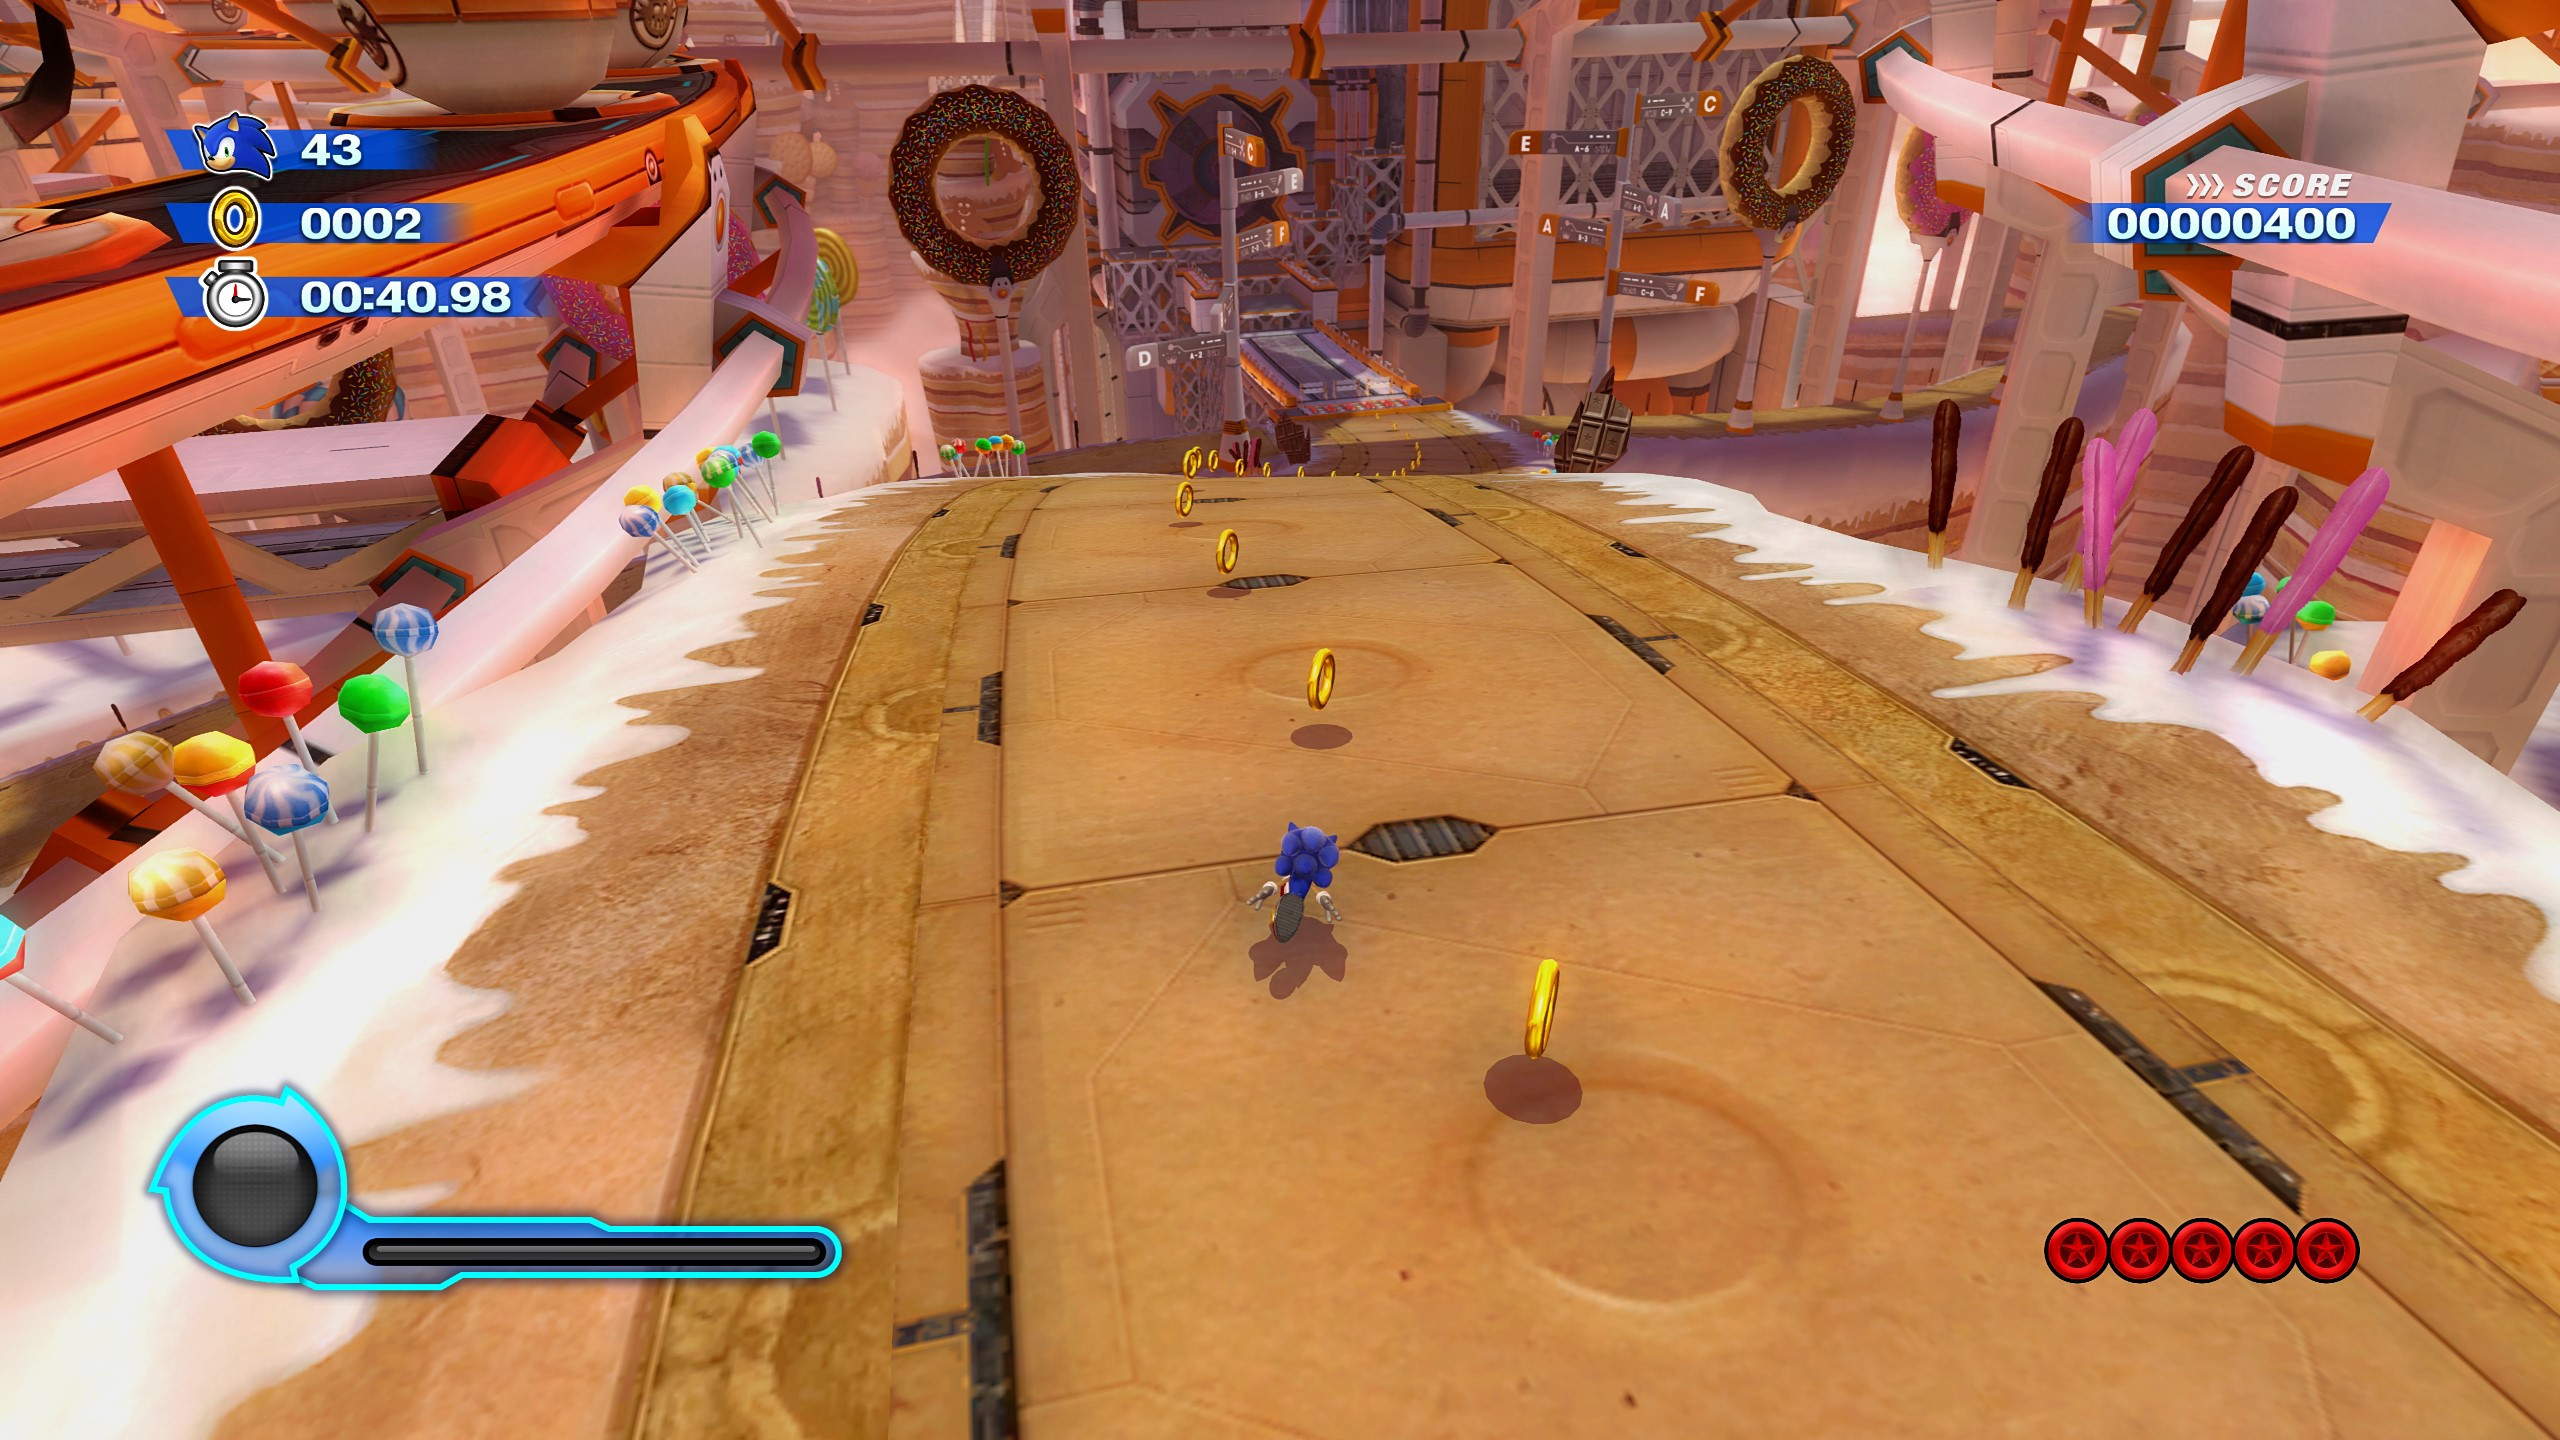 Play Sonic Colors DS Customization Widescreen, a game of Sonic